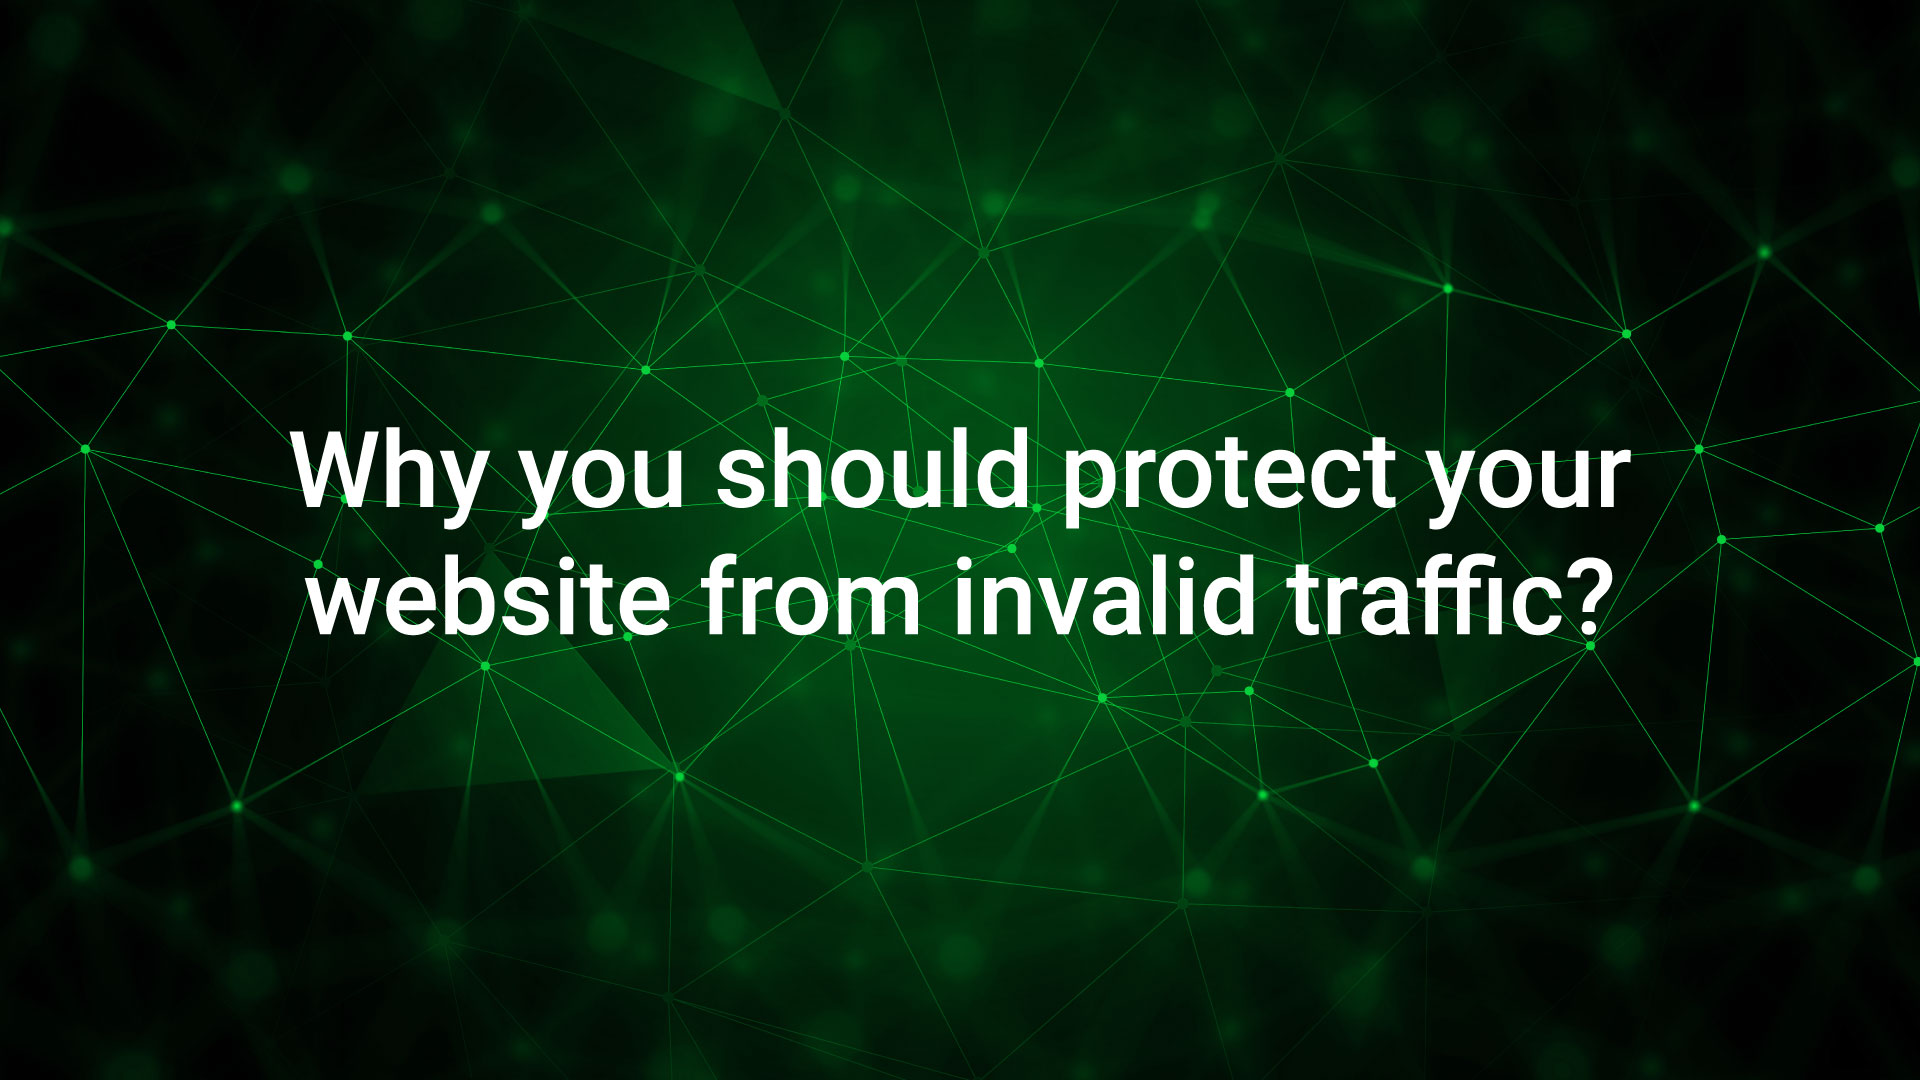 Why you should protect your website from invalid traffic?